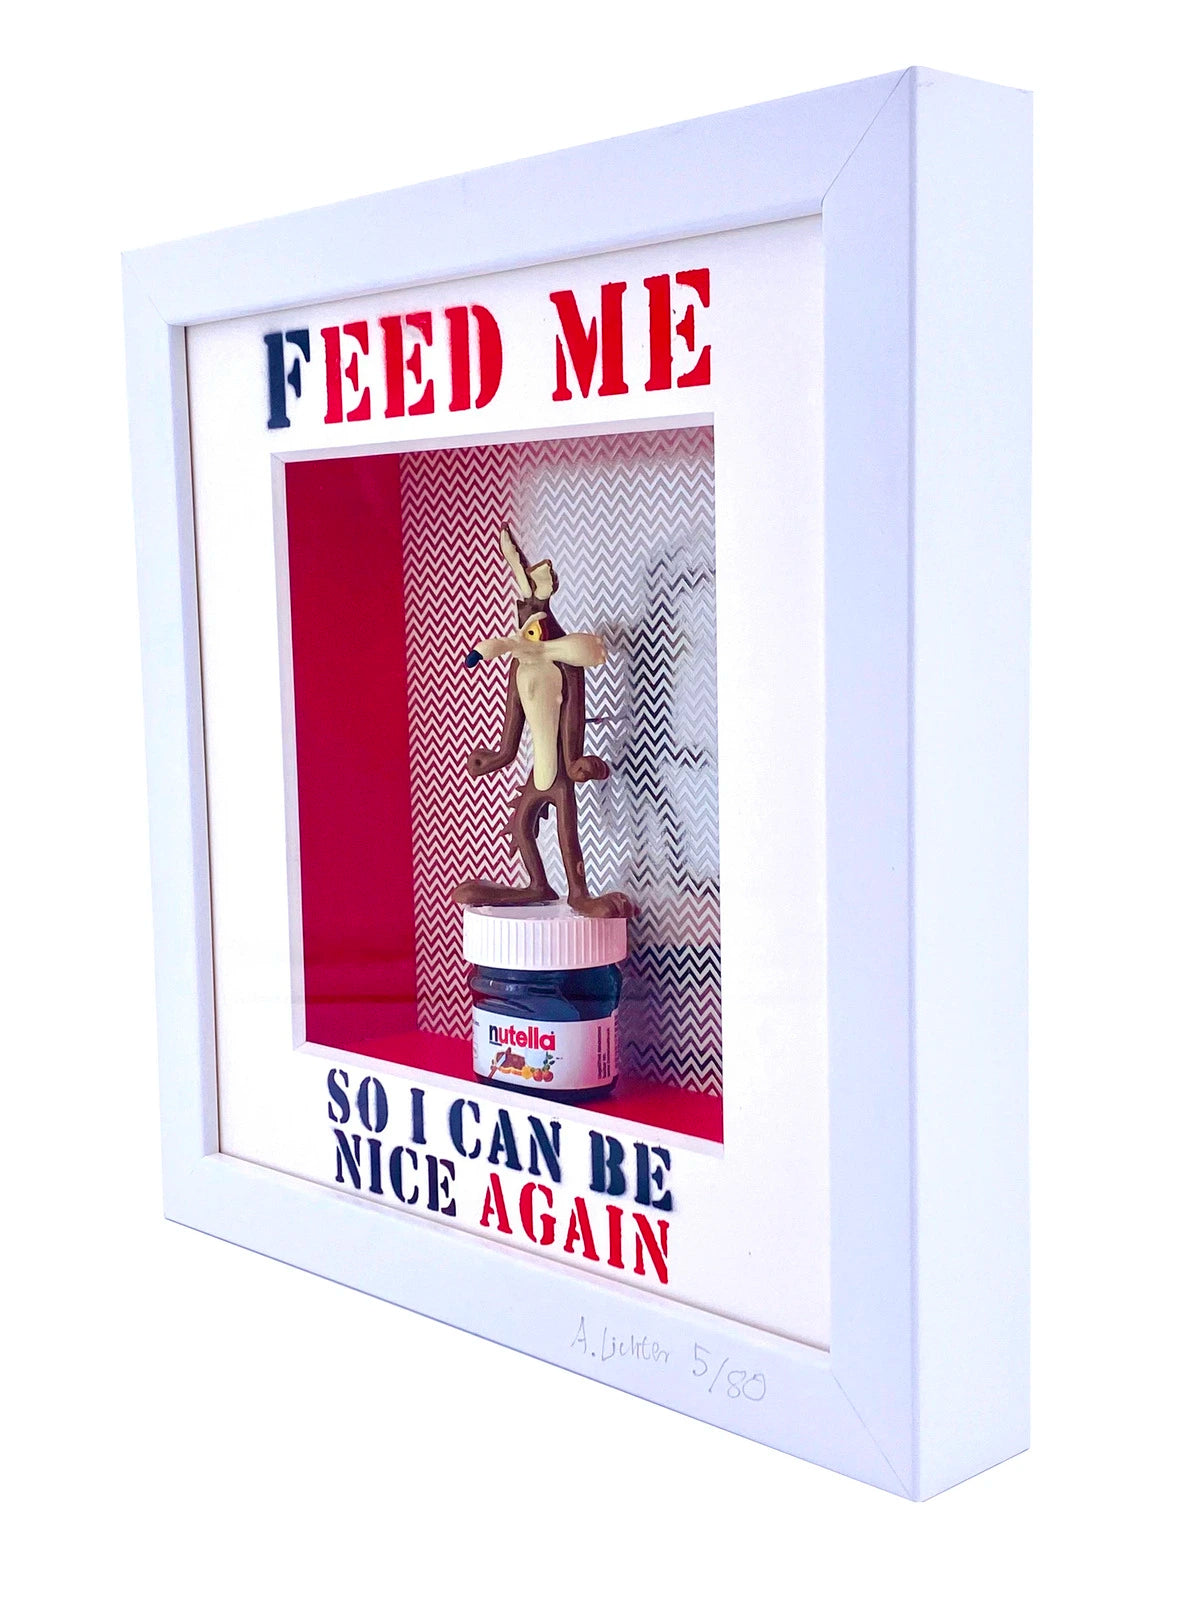 Andreas Lichter - Feed me  Wile E Coyote - Galerie Vogel